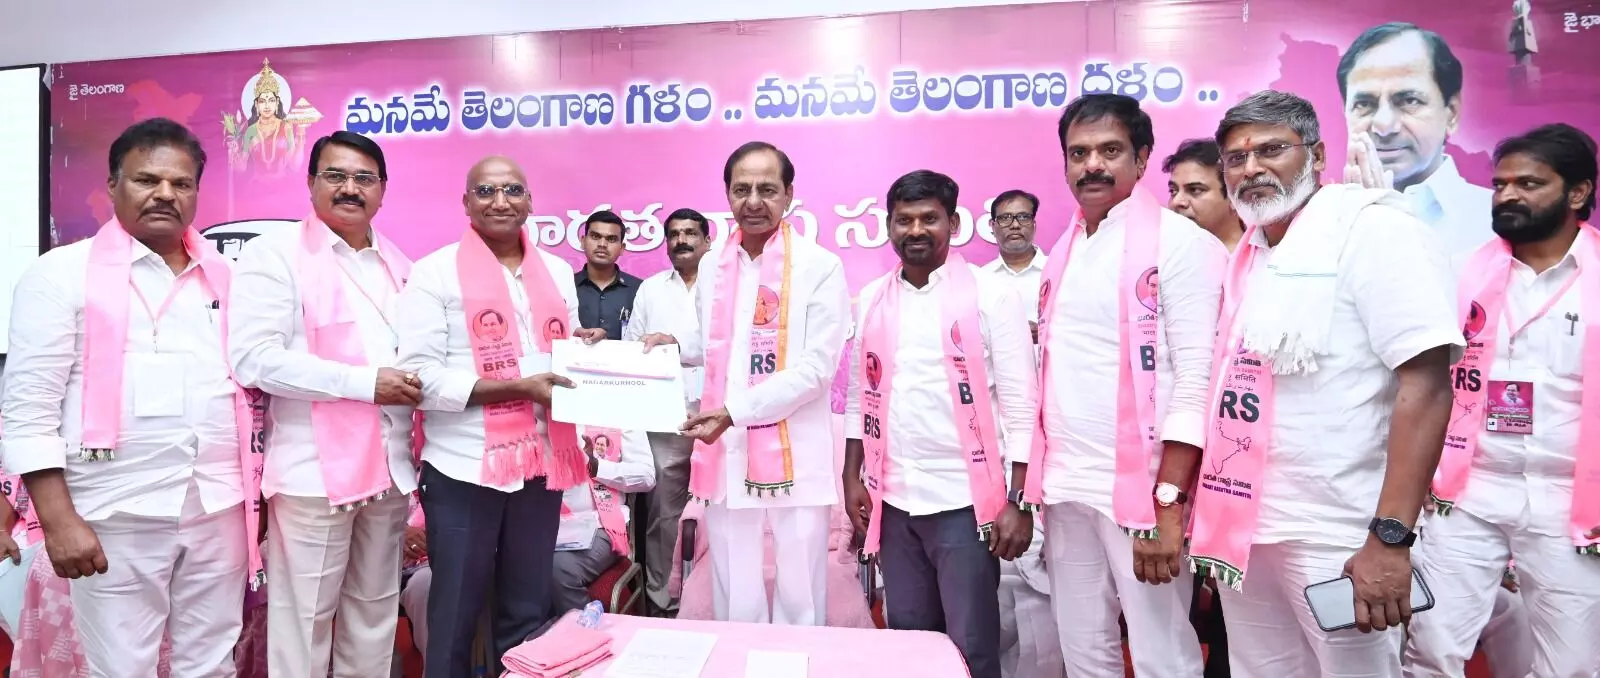 KCR distributes B Forms, to unveil new trend in campaign, polam baata, roadshows to go hand in hand